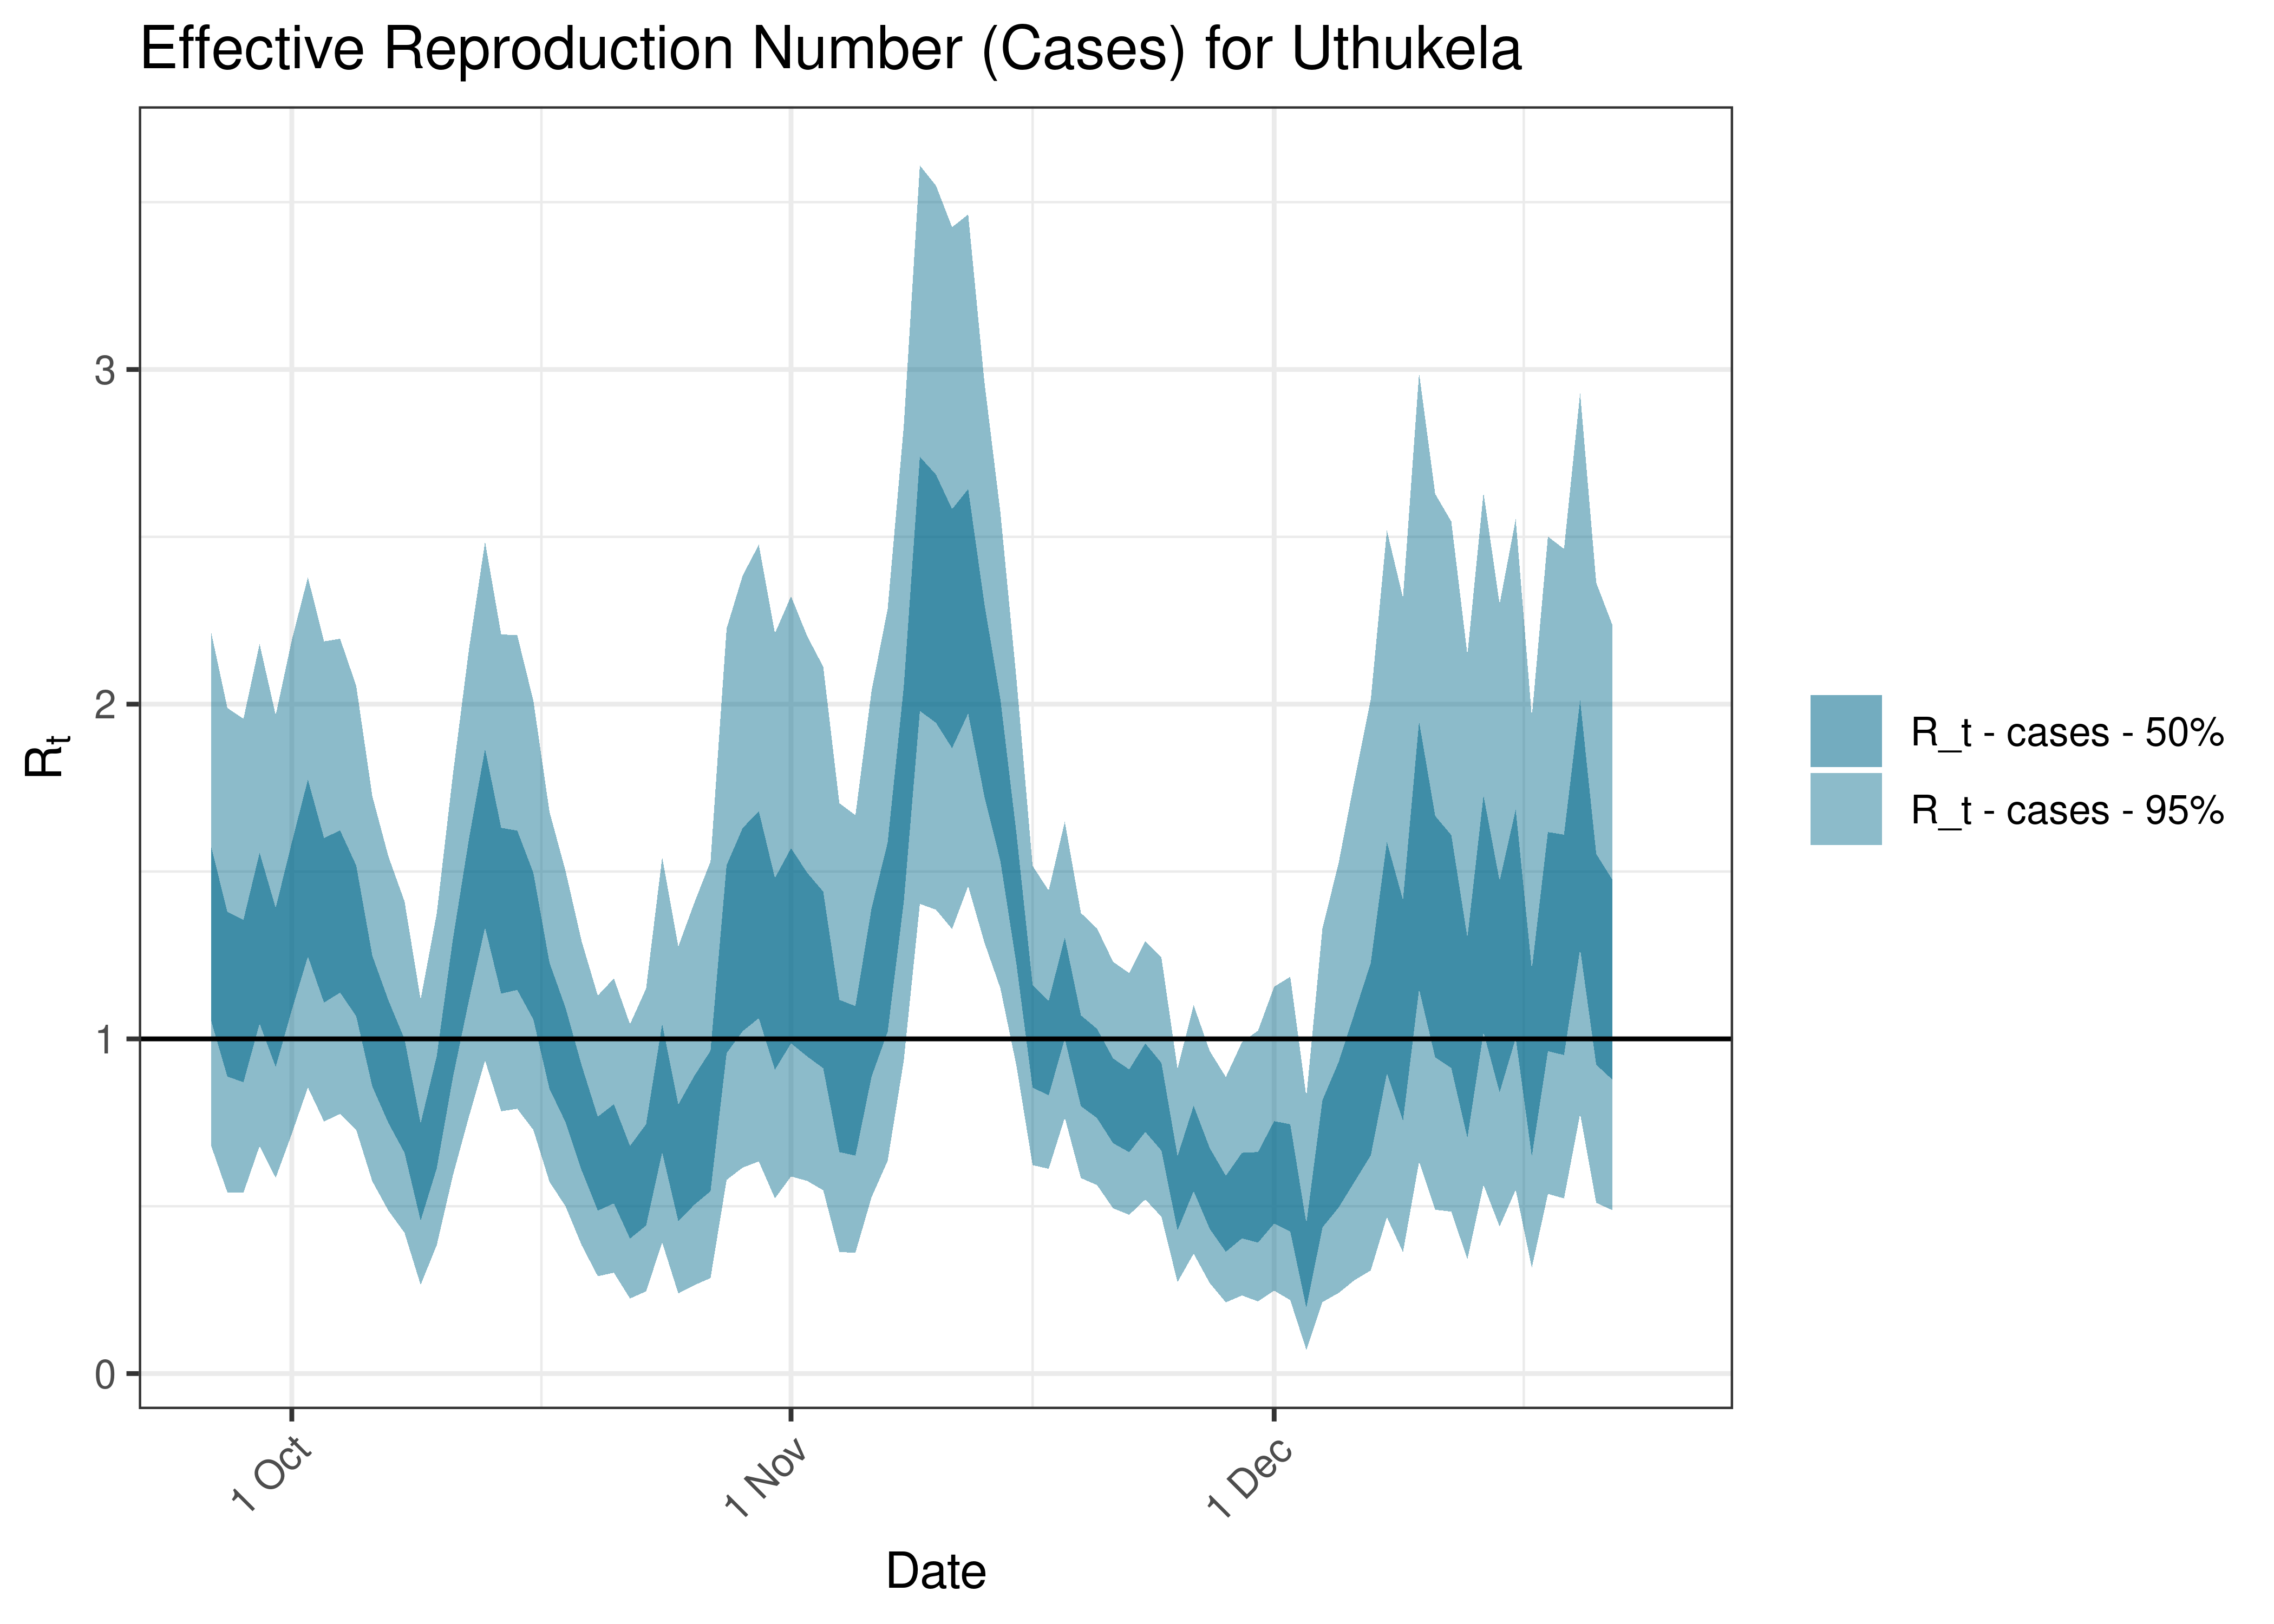 Estimated Effective Reproduction Number Based on Cases for Uthukela over last 90 days